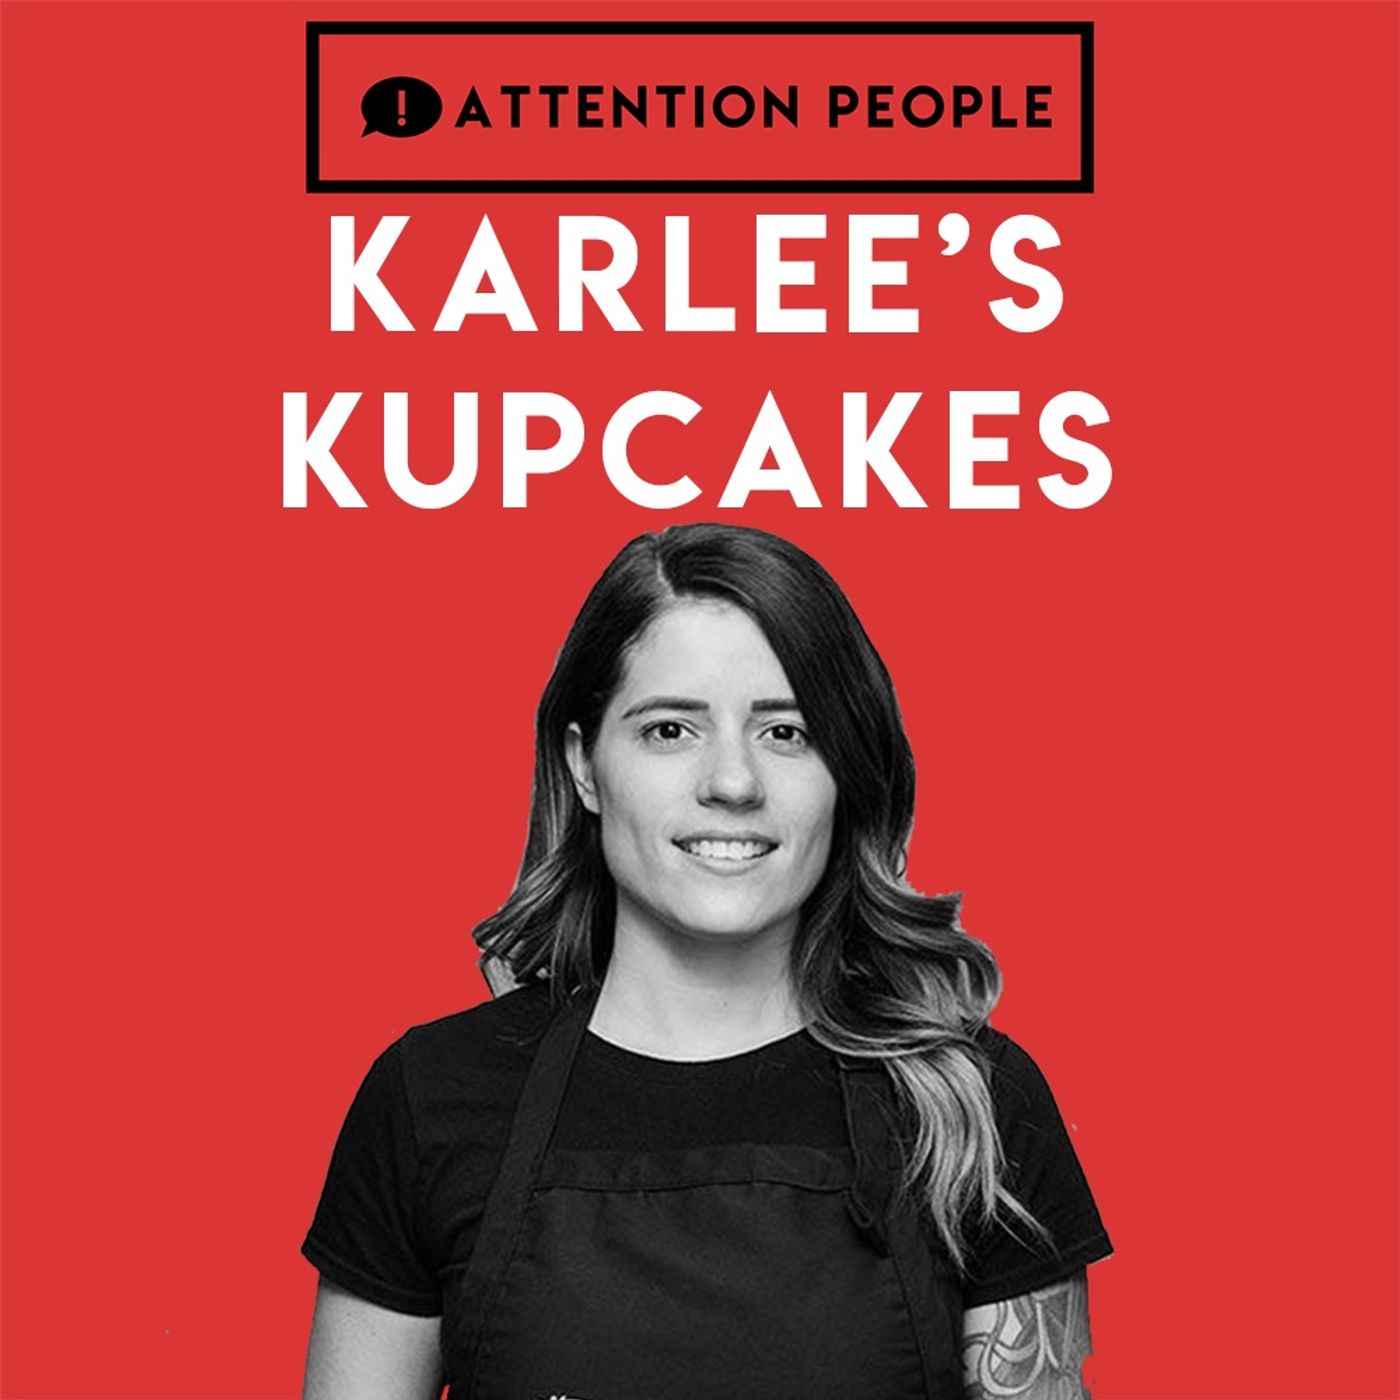 Karlee's Kupcakes - #Foodstagram and How To Turn Passion Into Profit